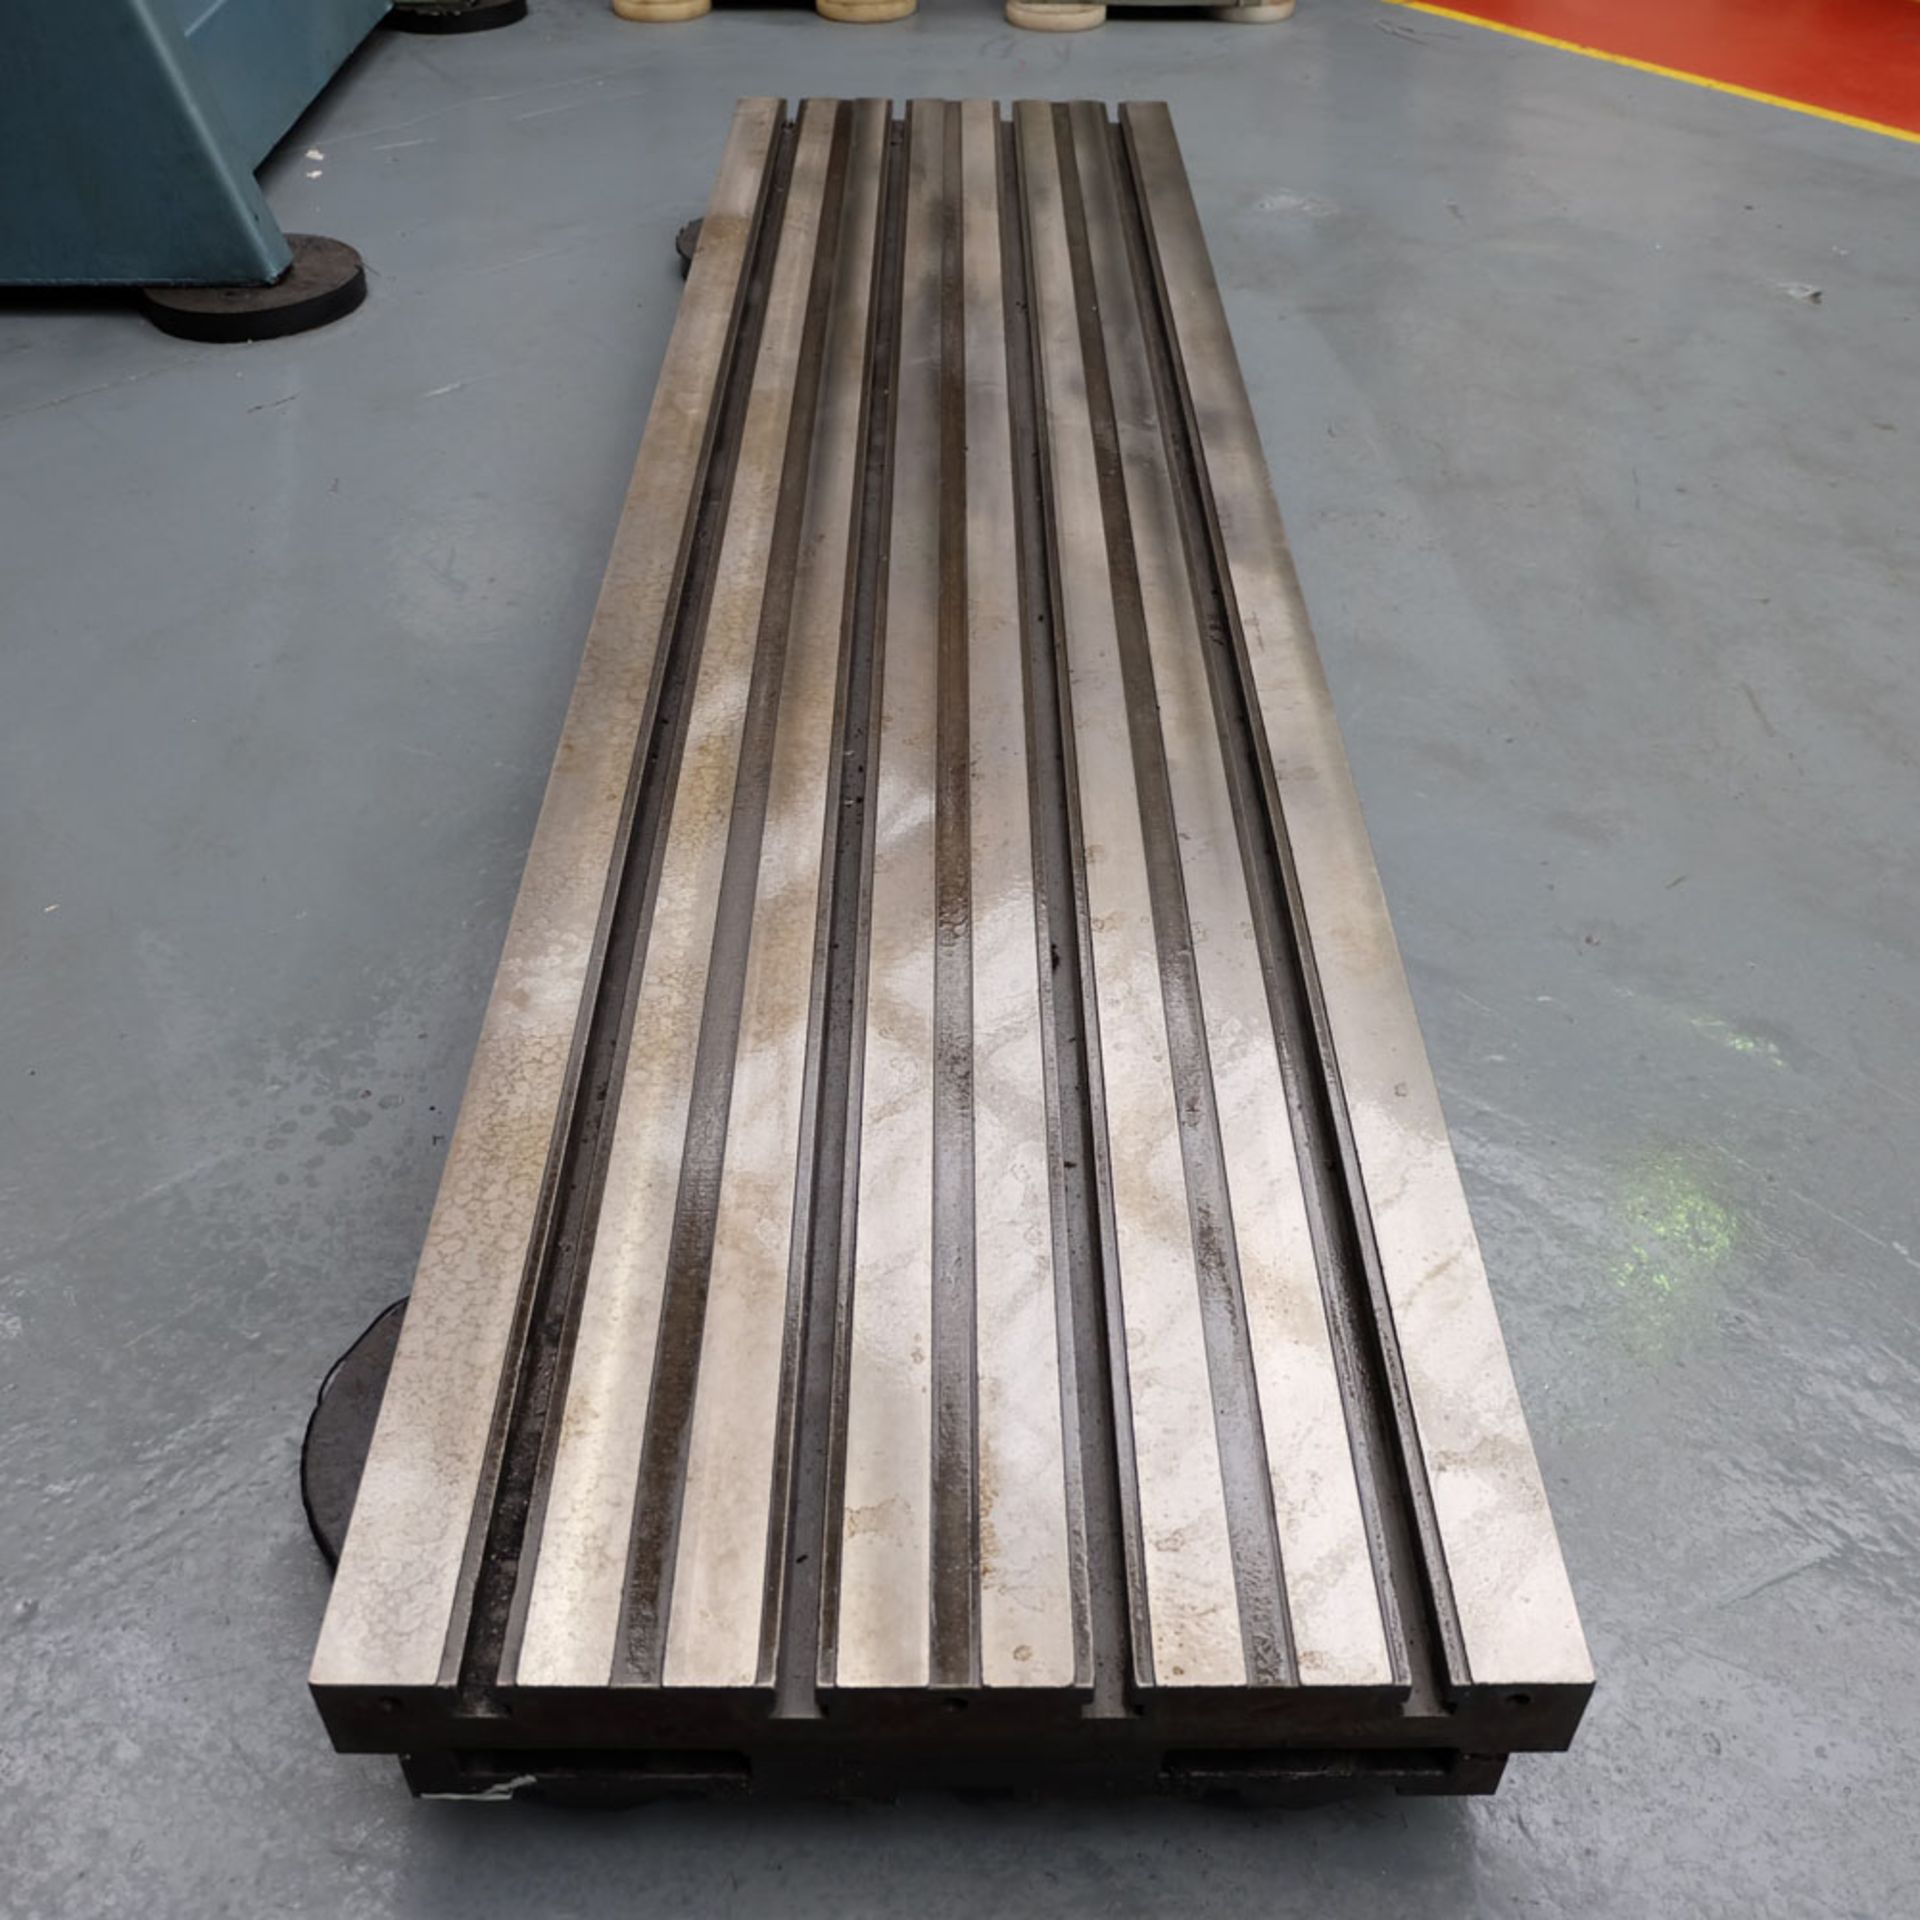 Steel Tee Slotted Plate/Table. Size 8' x 2'. Thickness 4 1/2". 4 Tee Slots. - Image 4 of 4